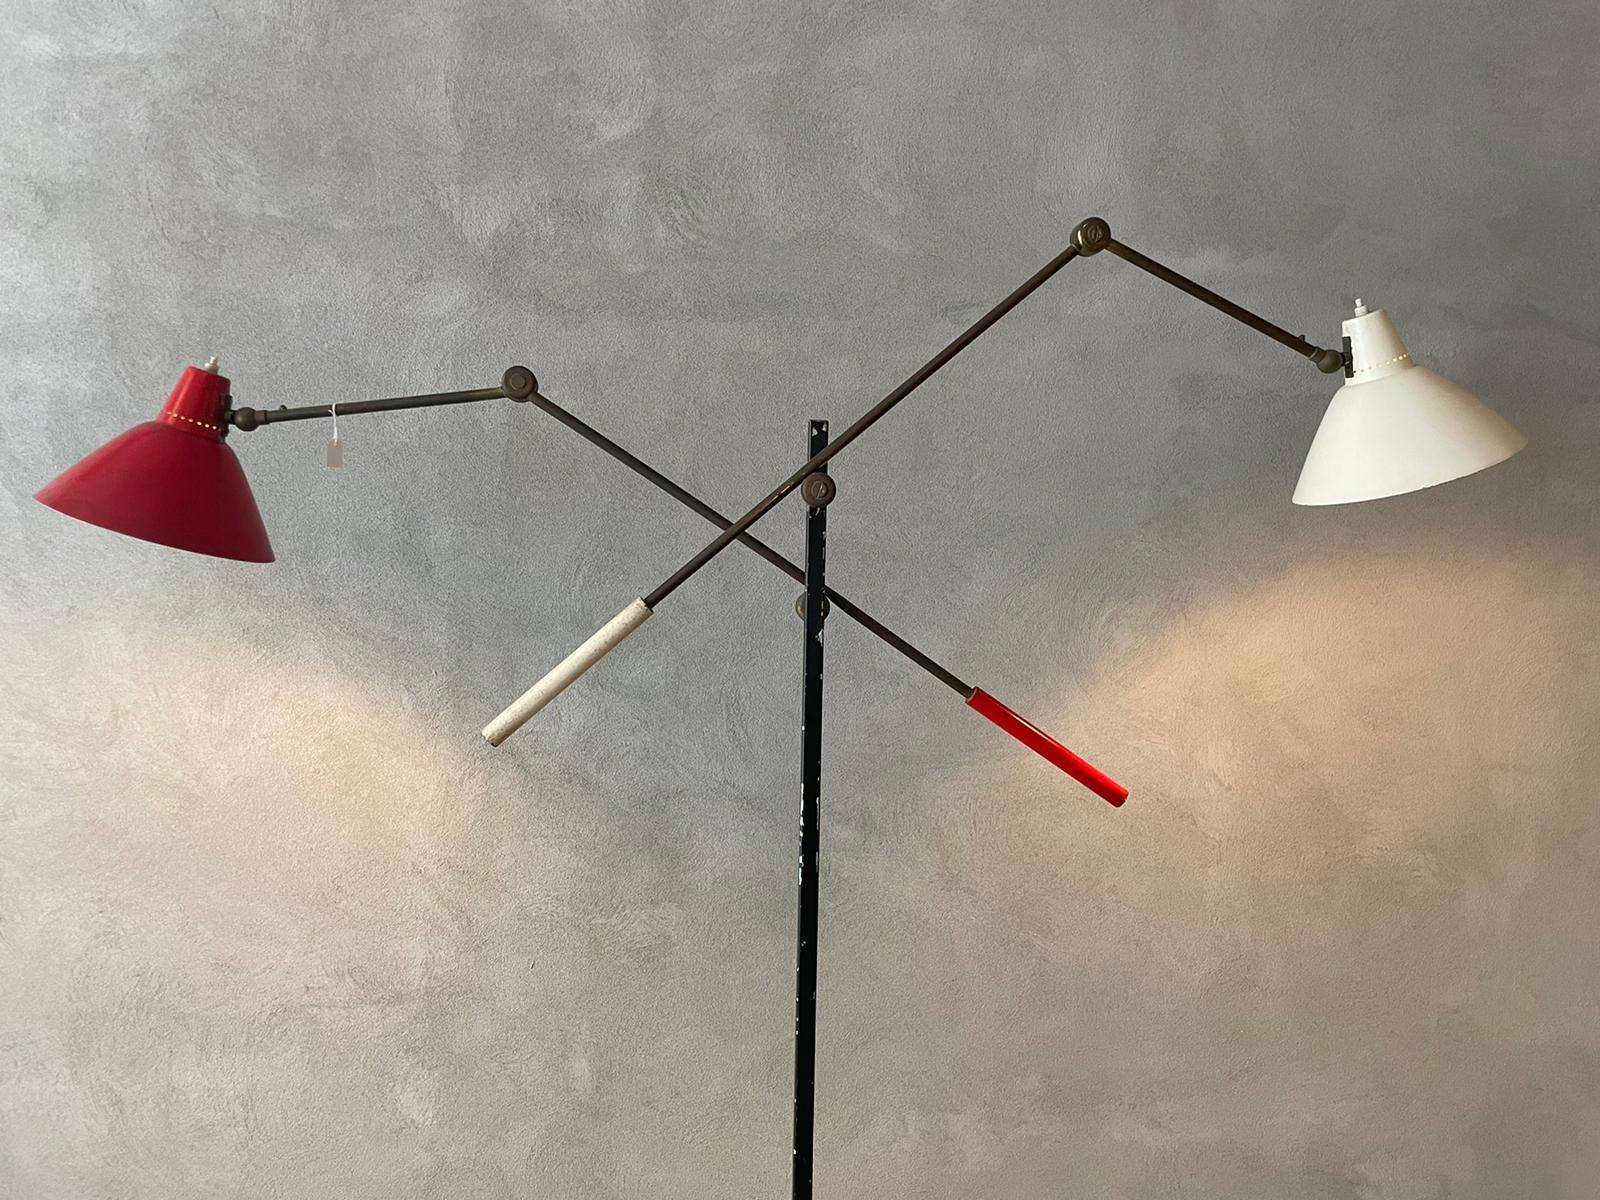 Floor lamp manufactured by Stilnovo in Italy, 1955.
The floor lamp has a circular white marble base, black lacquered metal steam.
The floor lamp has two brass arms and one white and one red lampshades that can be adjust to various positions and